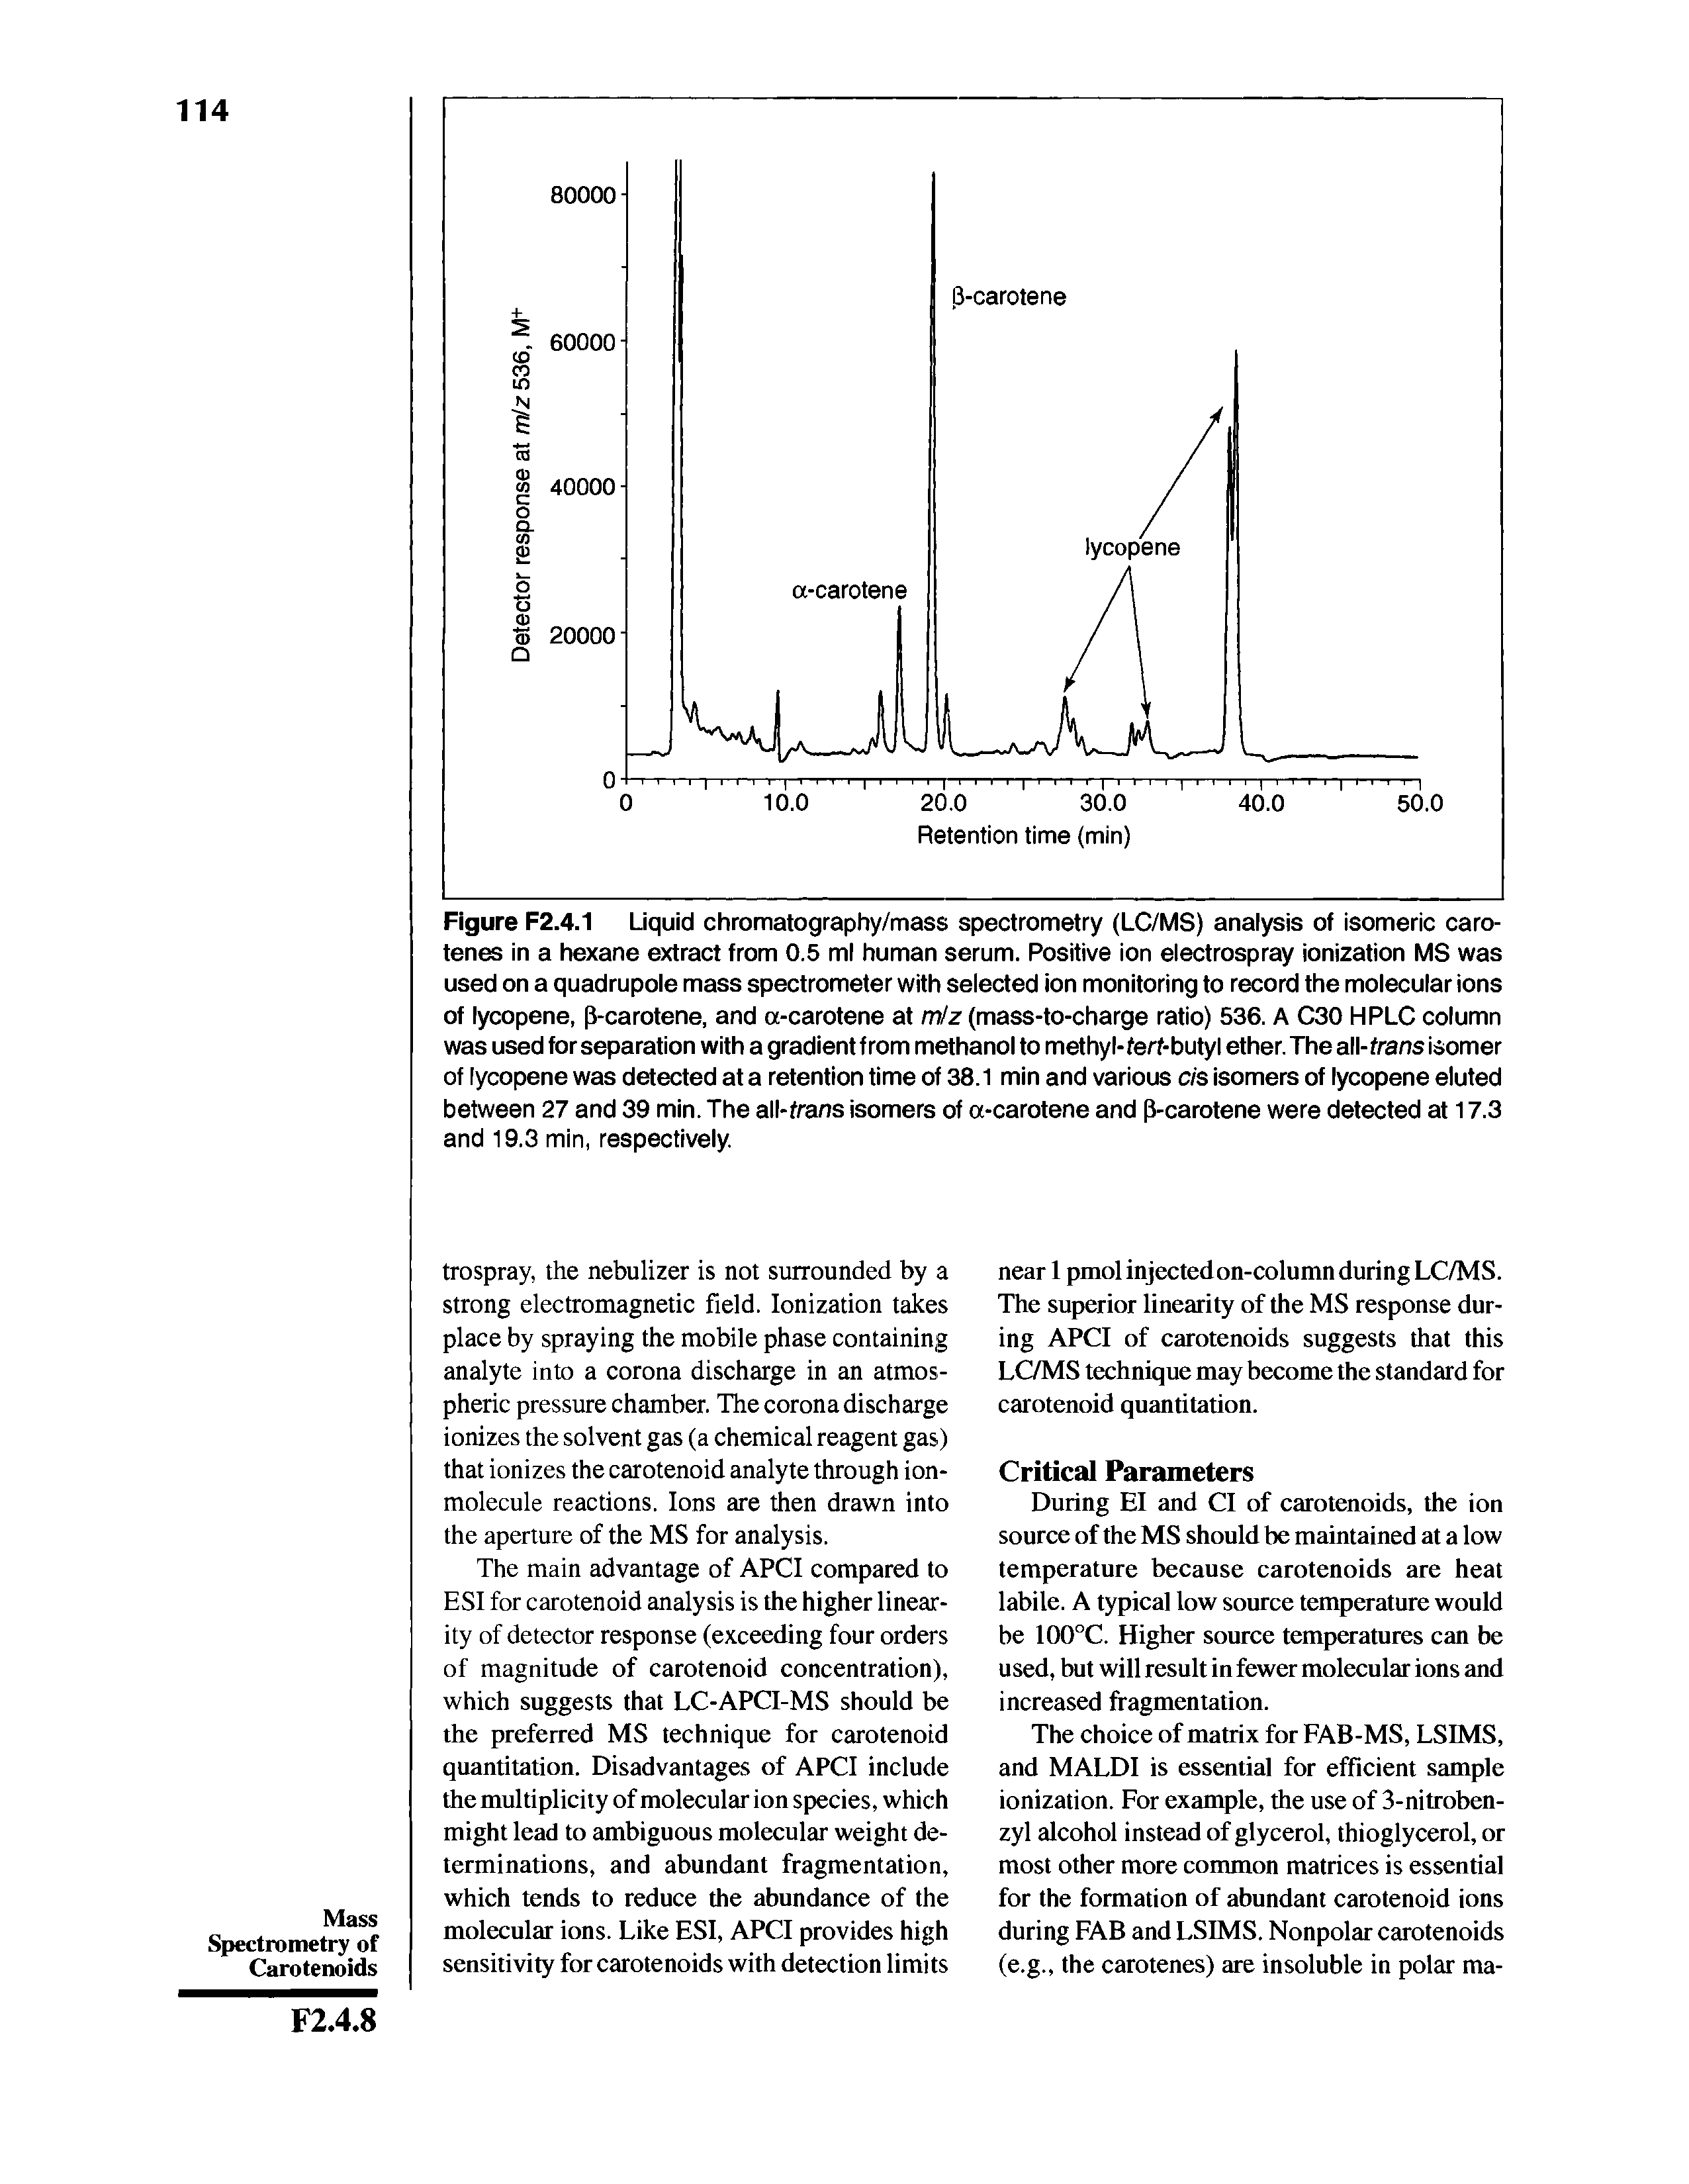 Figure F2.4.1 Liquid chromatography/mass spectrometry (LC/MS) analysis of isomeric carotenes in a hexane extract from 0.5 ml human serum. Positive ion electrospray ionization MS was used on a quadrupole mass spectrometer with selected ion monitoring to record the molecular ions of lycopene, p-carotene, and a-carotene at m/z (mass-to-charge ratio) 536. A C30 HPLC column was used for separation with a gradient from methanol to methyl-ferf-butyl ether. The a -trans isomer of lycopene was detected at a retention time of 38.1 min and various c/ s isomers of lycopene eluted between 27 and 39 min. The all-frans isomers of a-carotene and P-carotene were detected at 17.3 and 19.3 min, respectively.